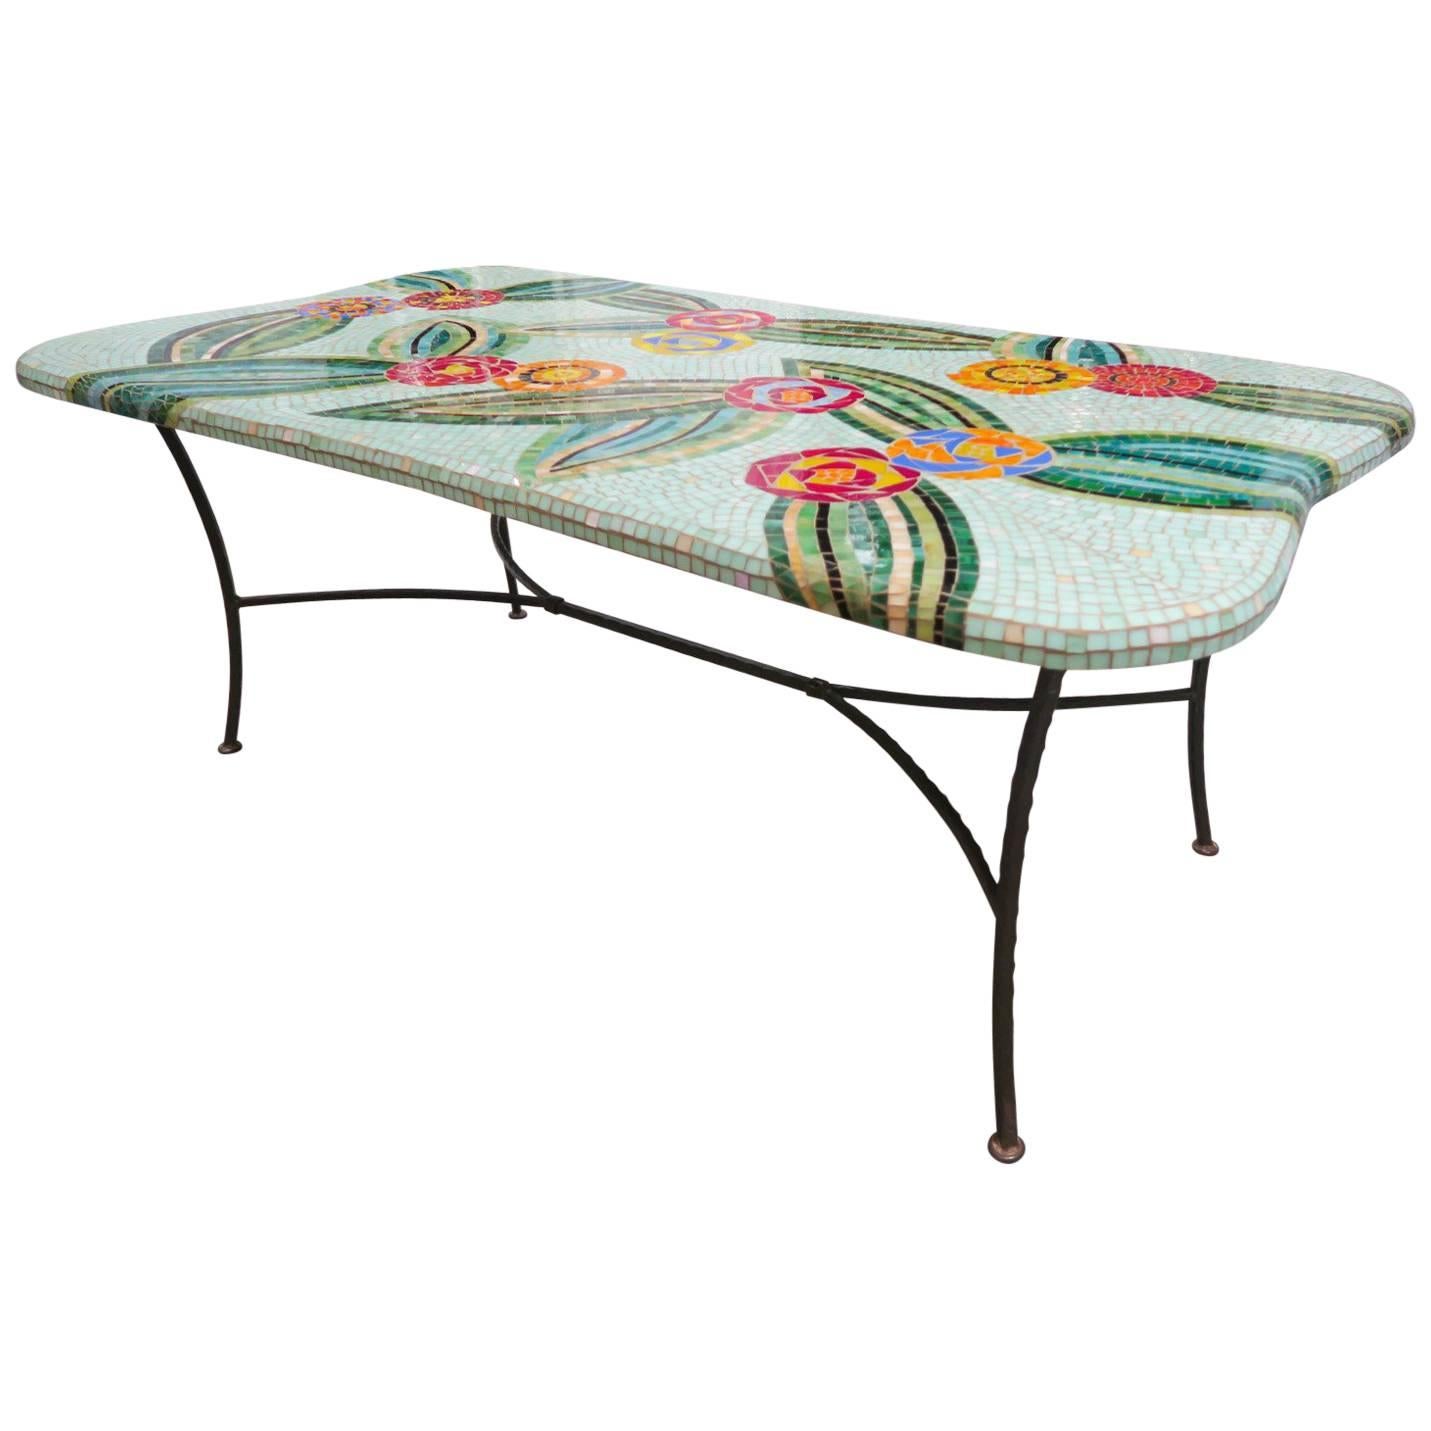 ON SALE NOW! Colorfully Beautiful Mosaic Custom Dining Table For Sale